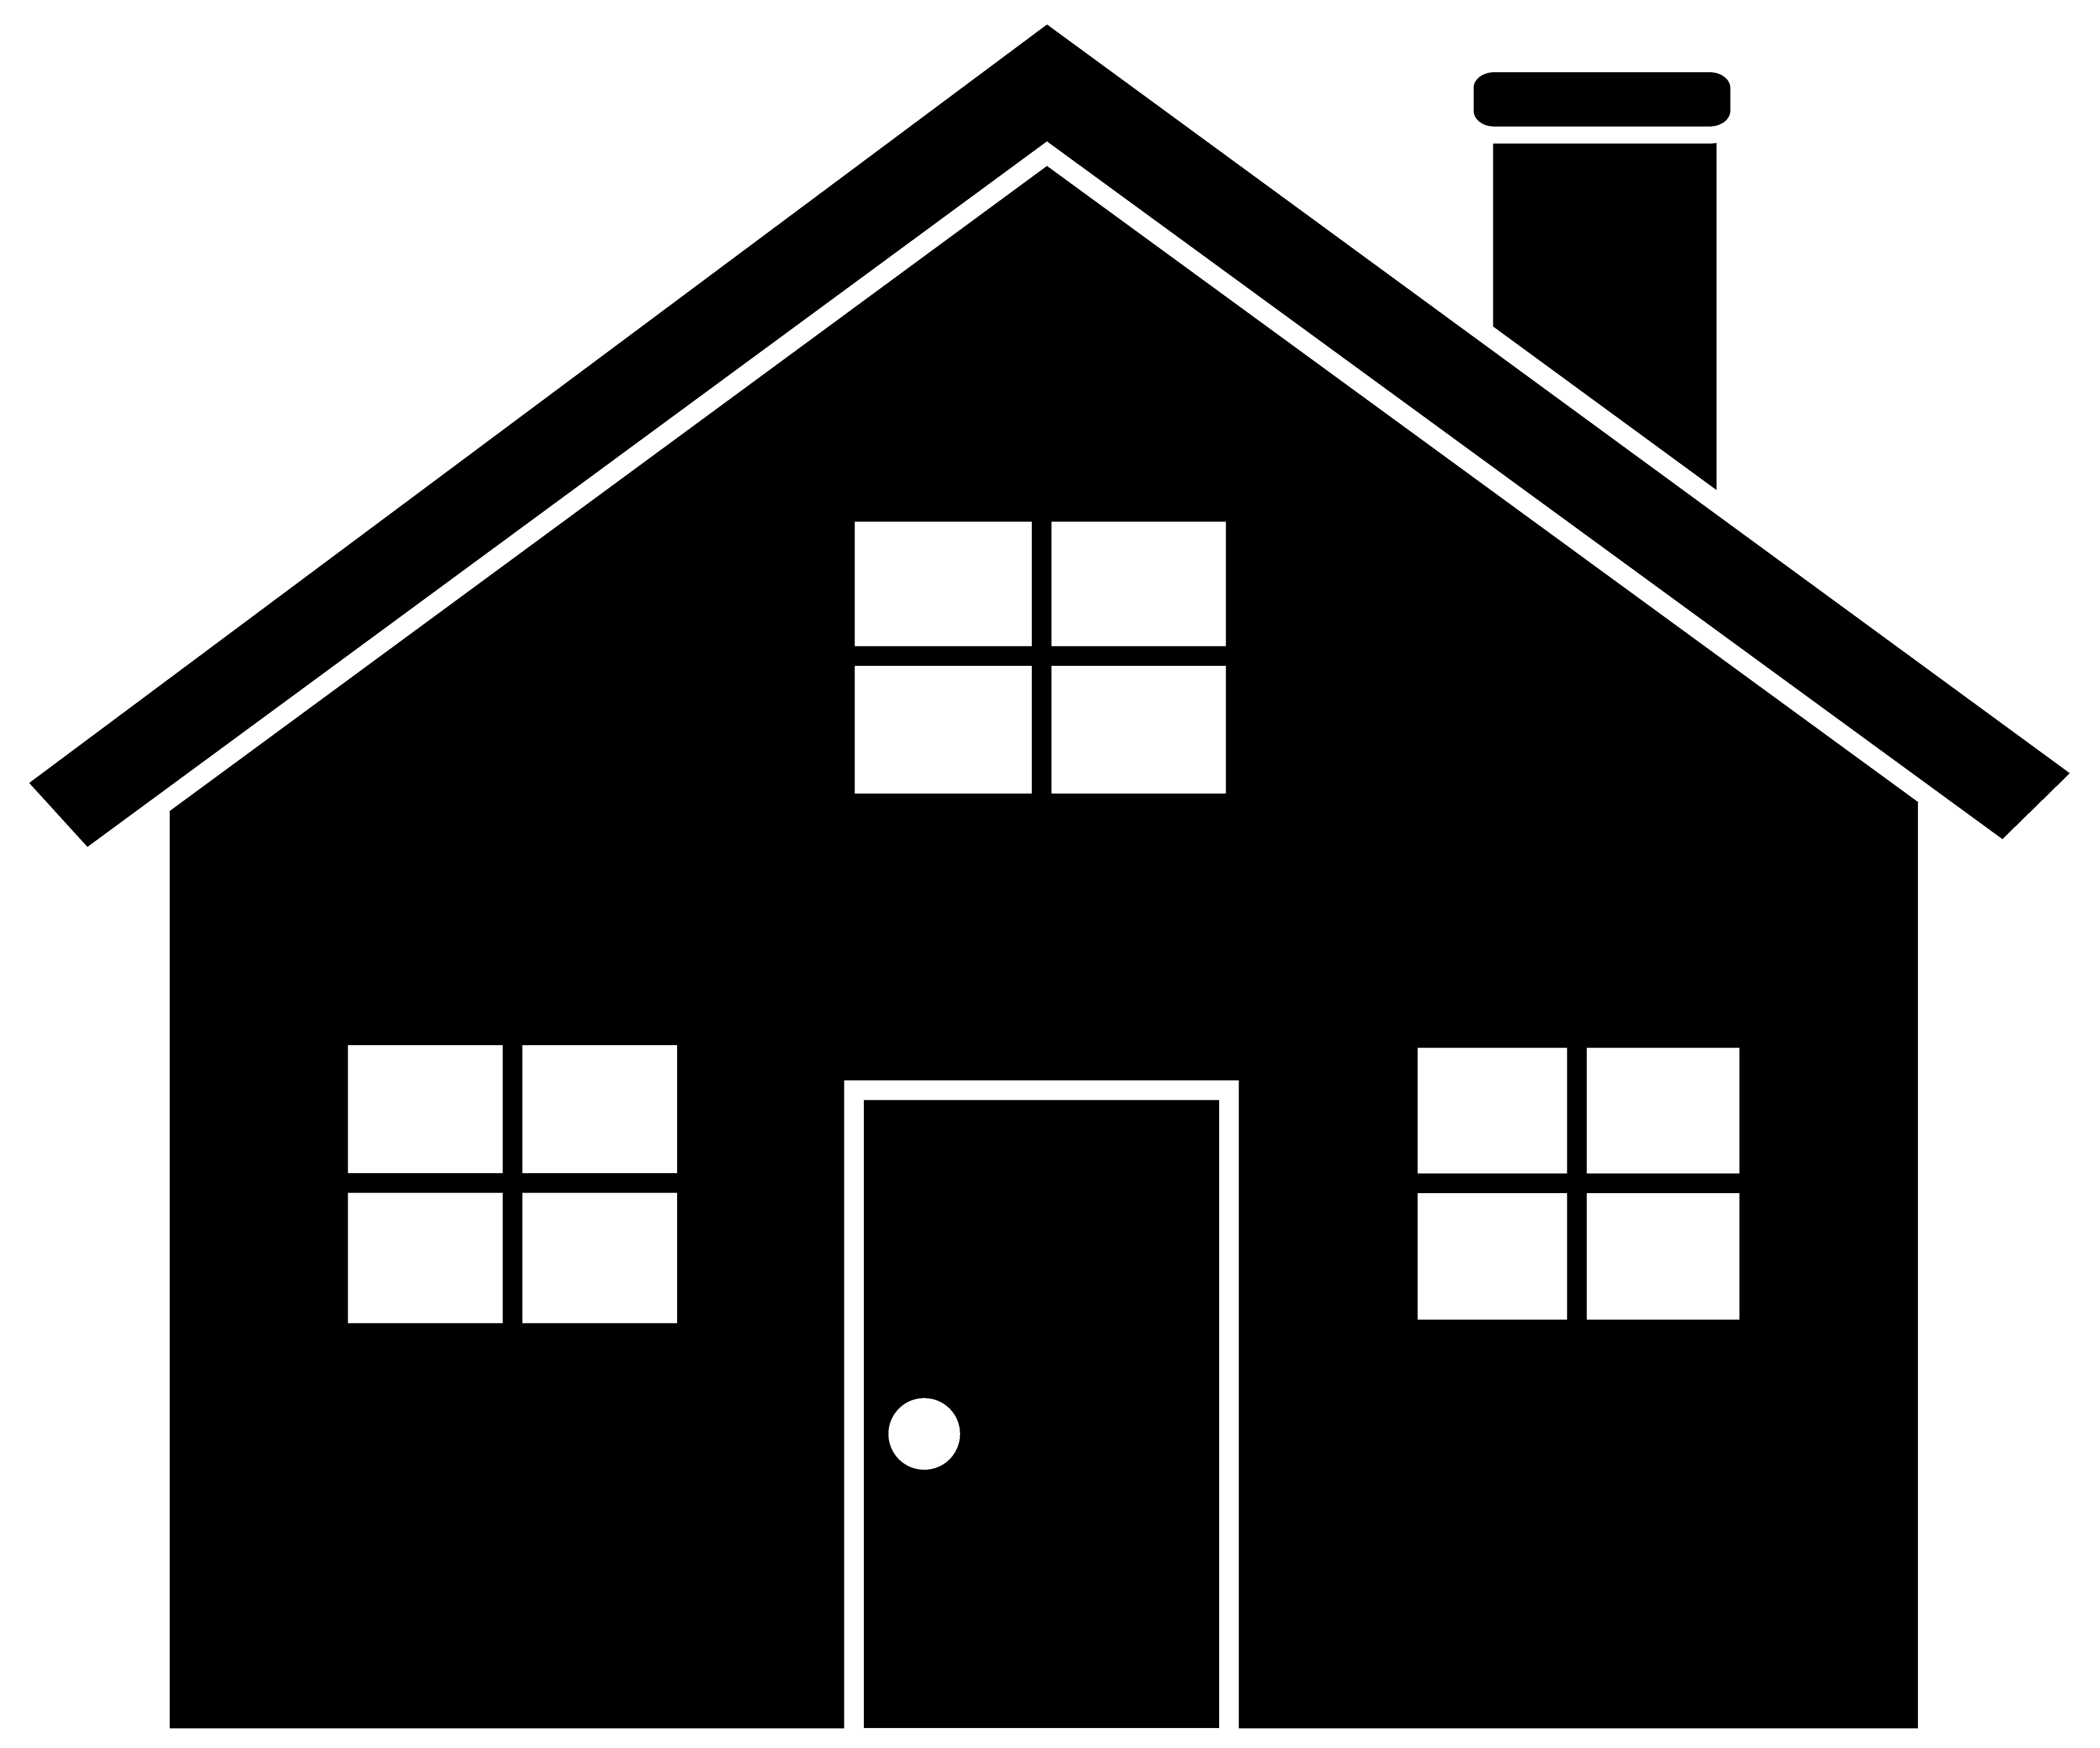 House clipart emoji. Silhouette of a group